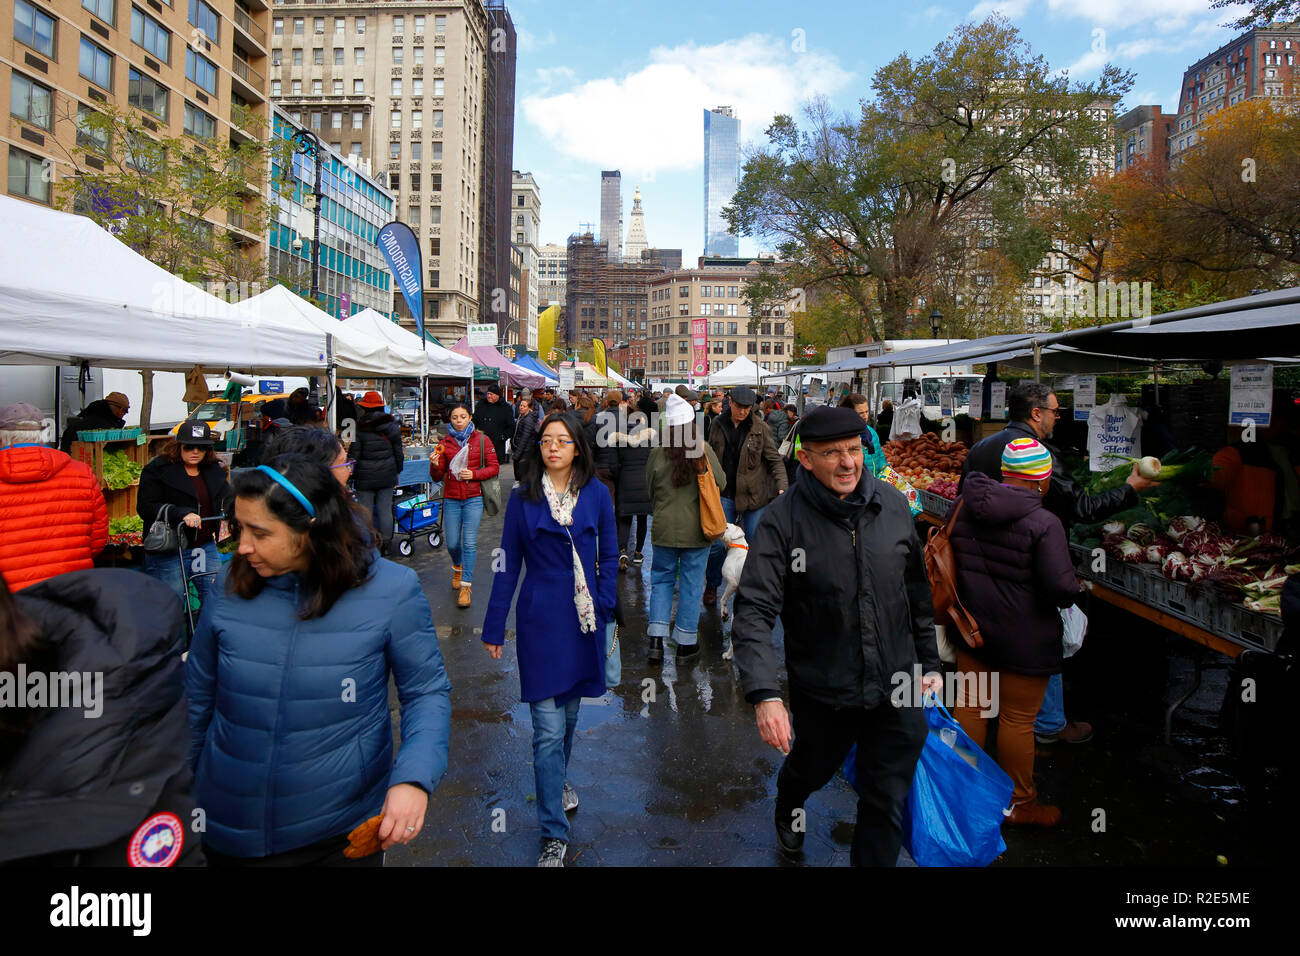 People shopping in the Union Square Greenmarket on a weekend autumn morning. New York Stock Photo